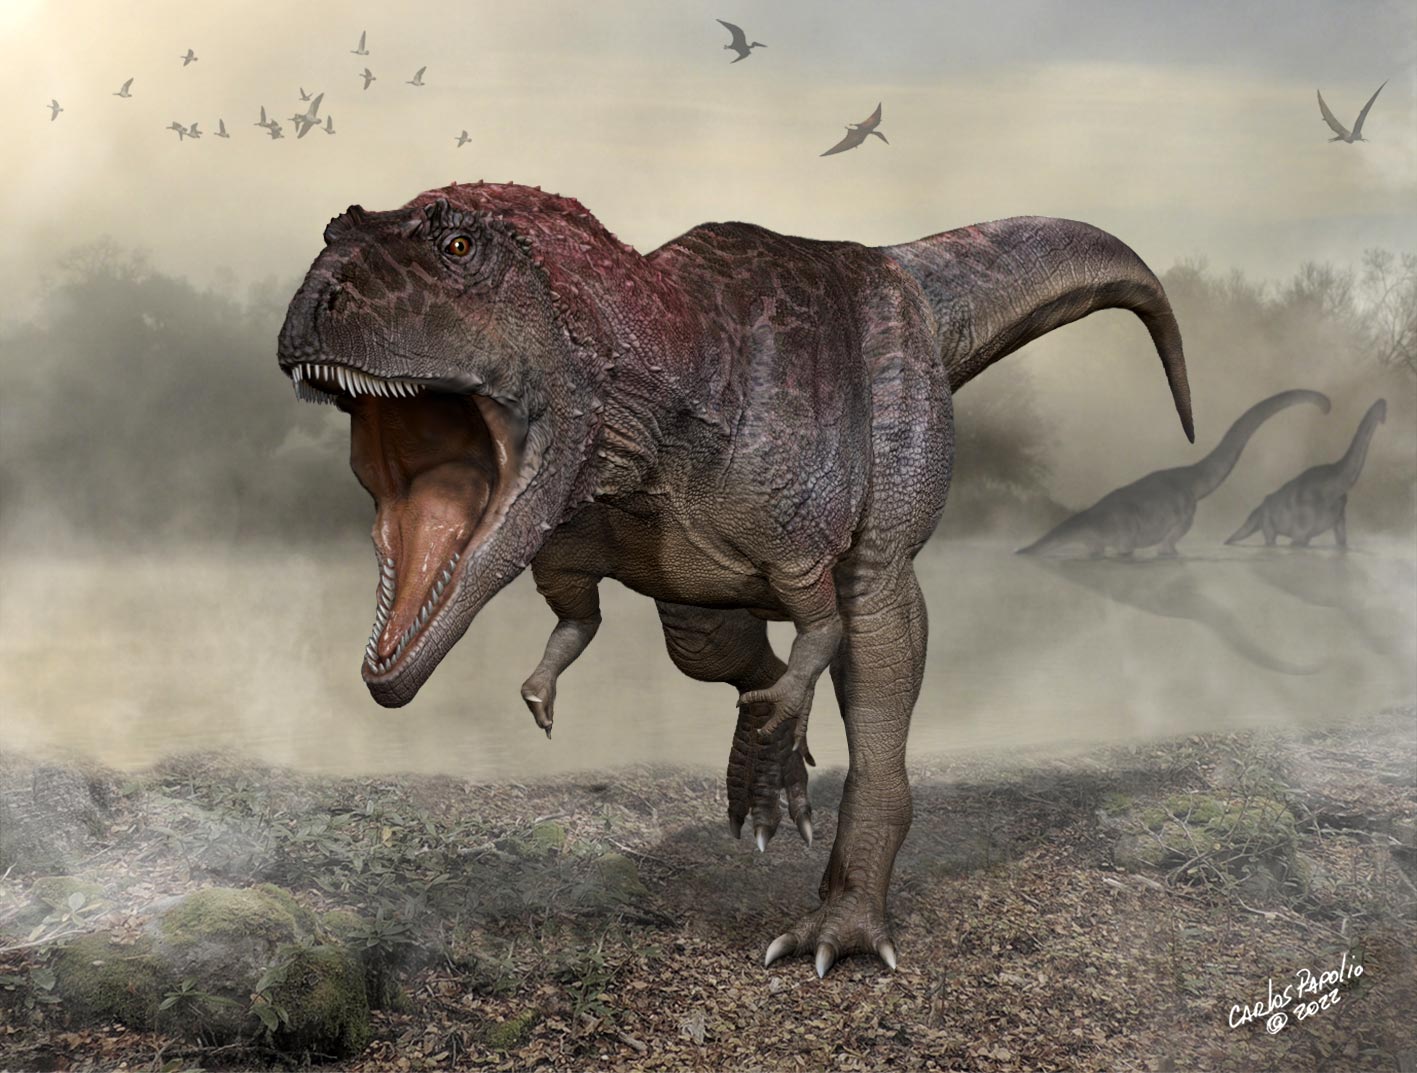 Discover a new giant carnivorous dinosaur with tiny arms like T. rex